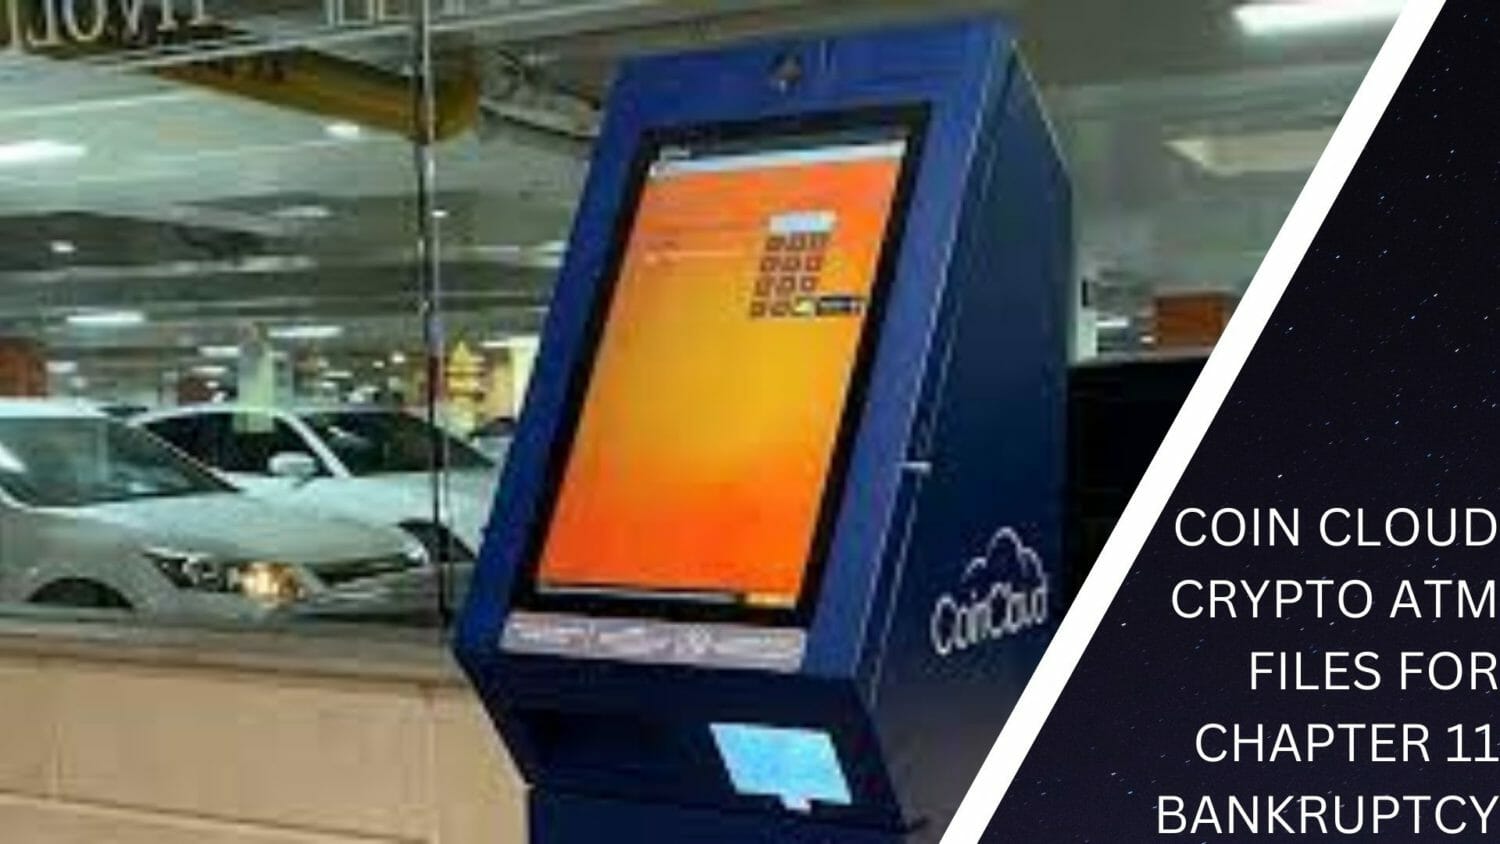 Coin Cloud Crypto Atm Files For Chapter 11 Bankruptcy